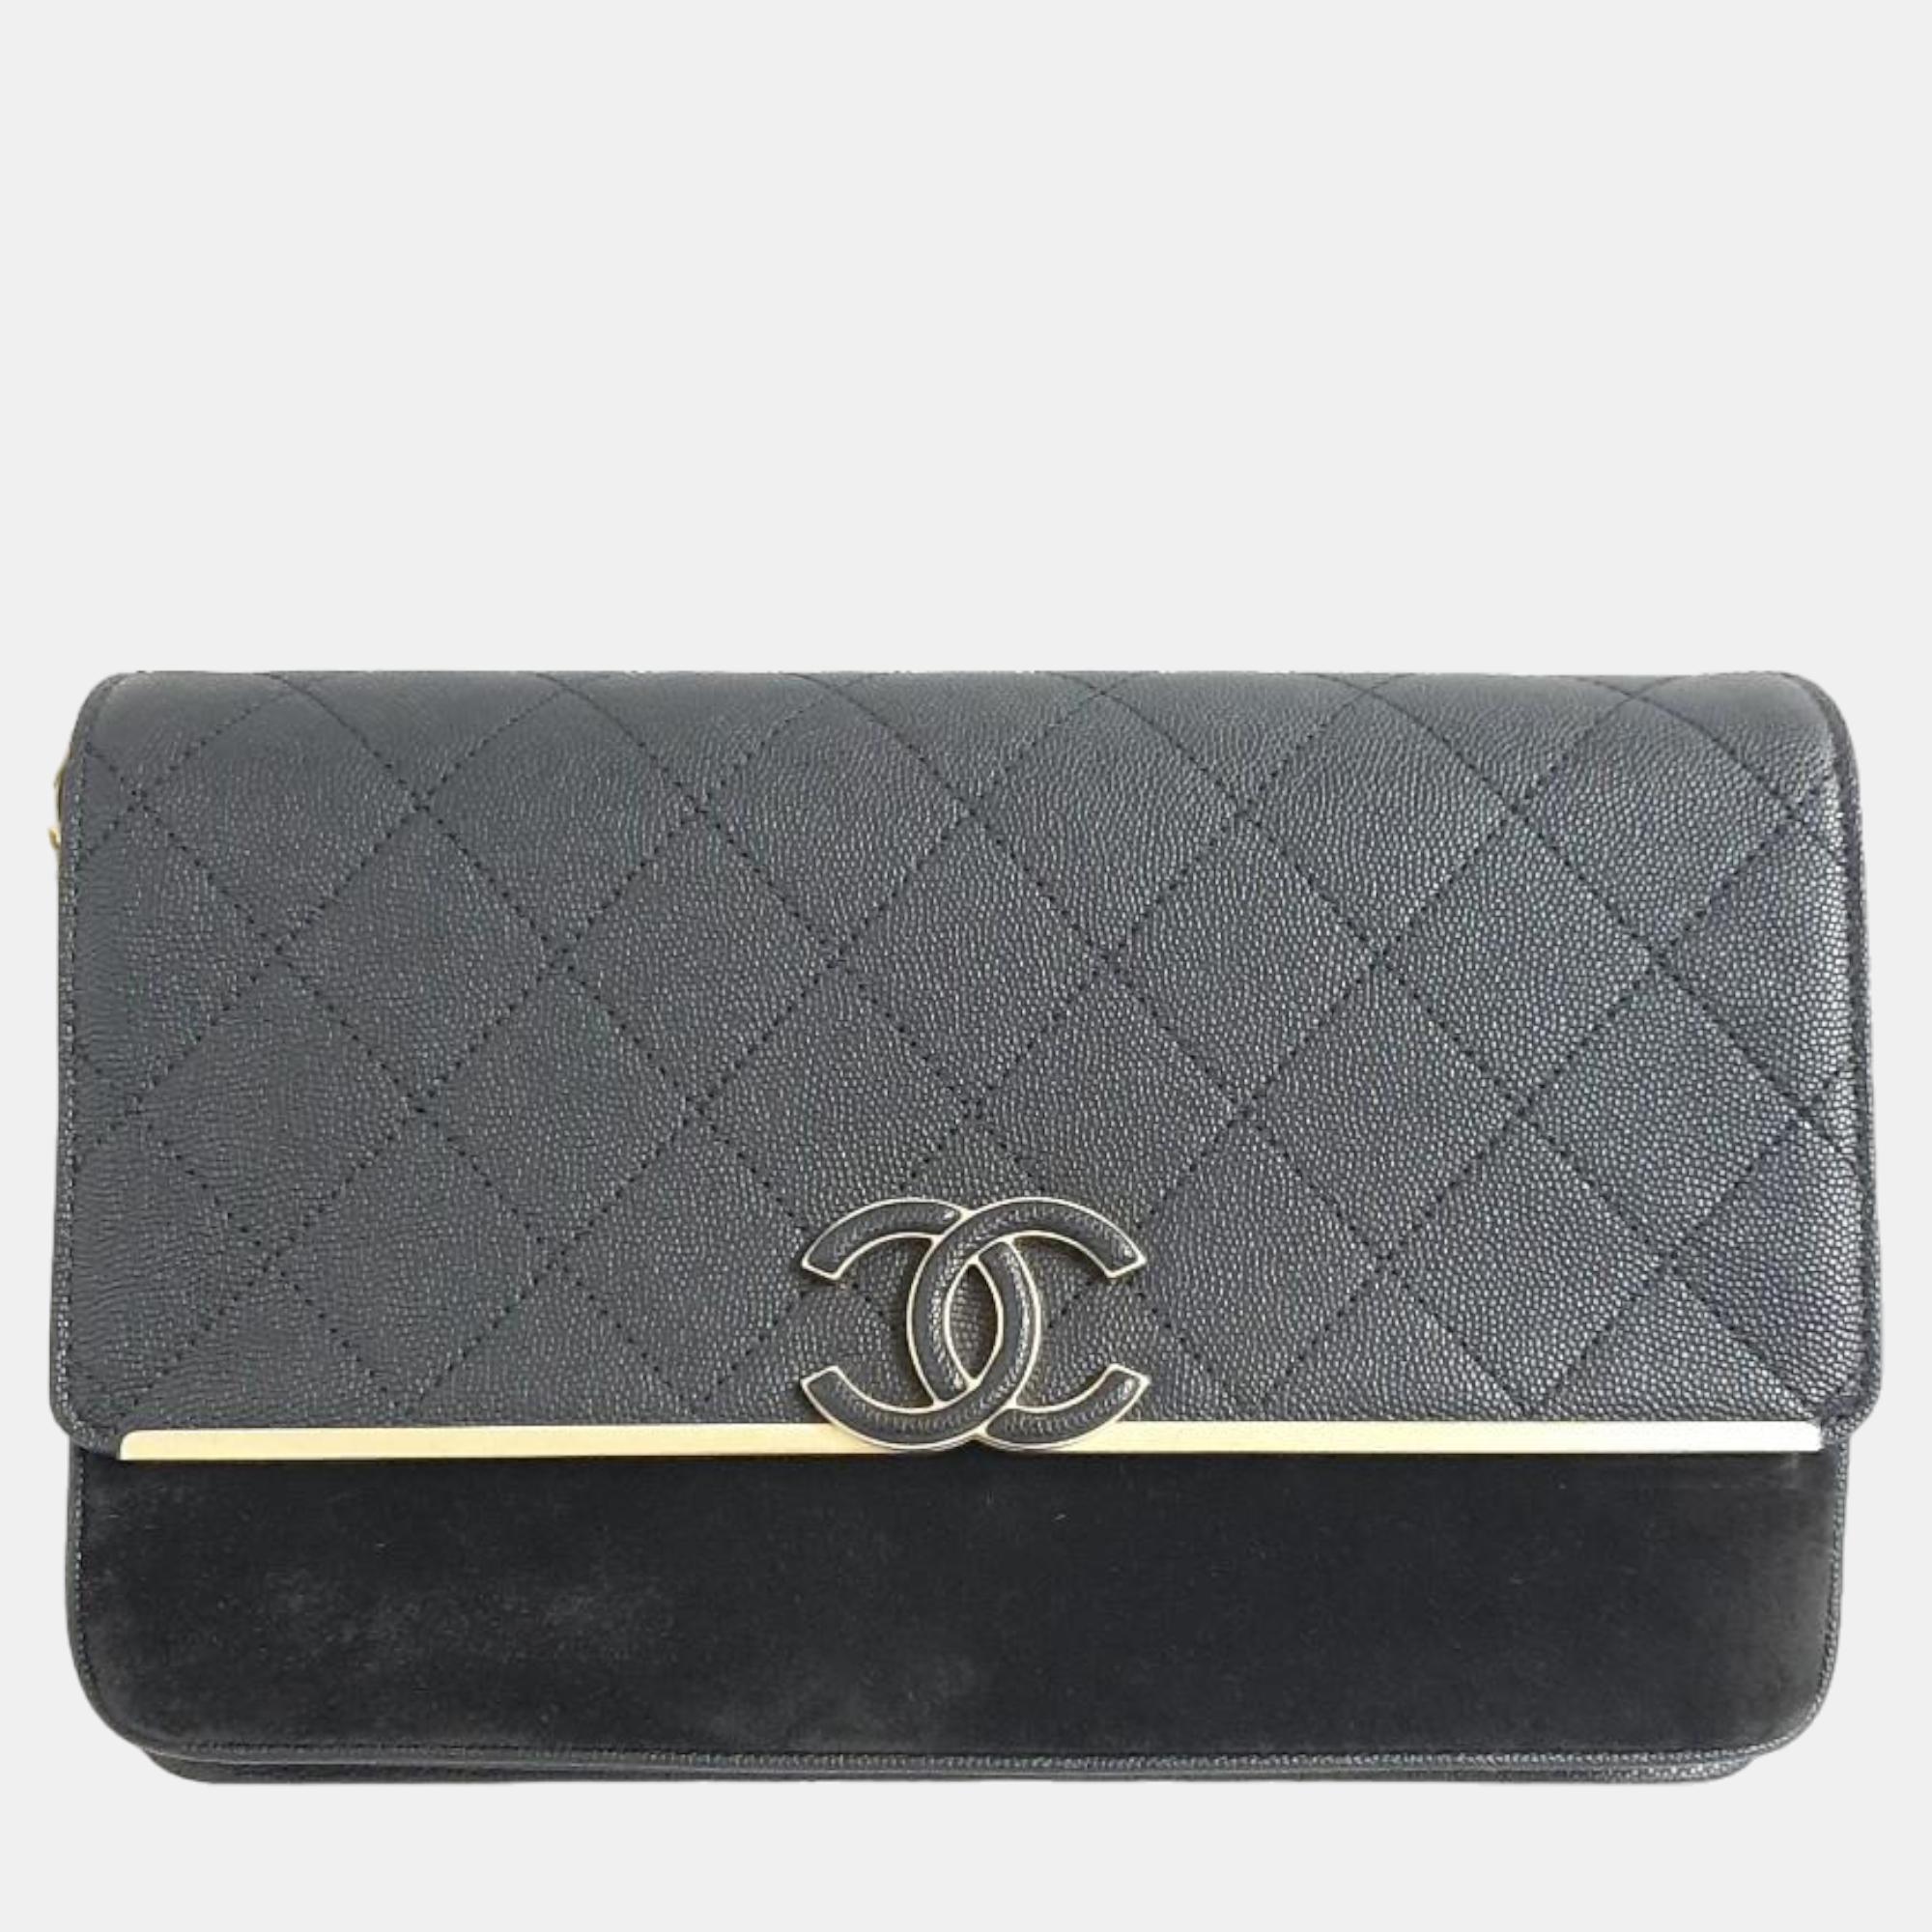 Chanel Black Leather And Suede Coco Flap Shoulder Bag